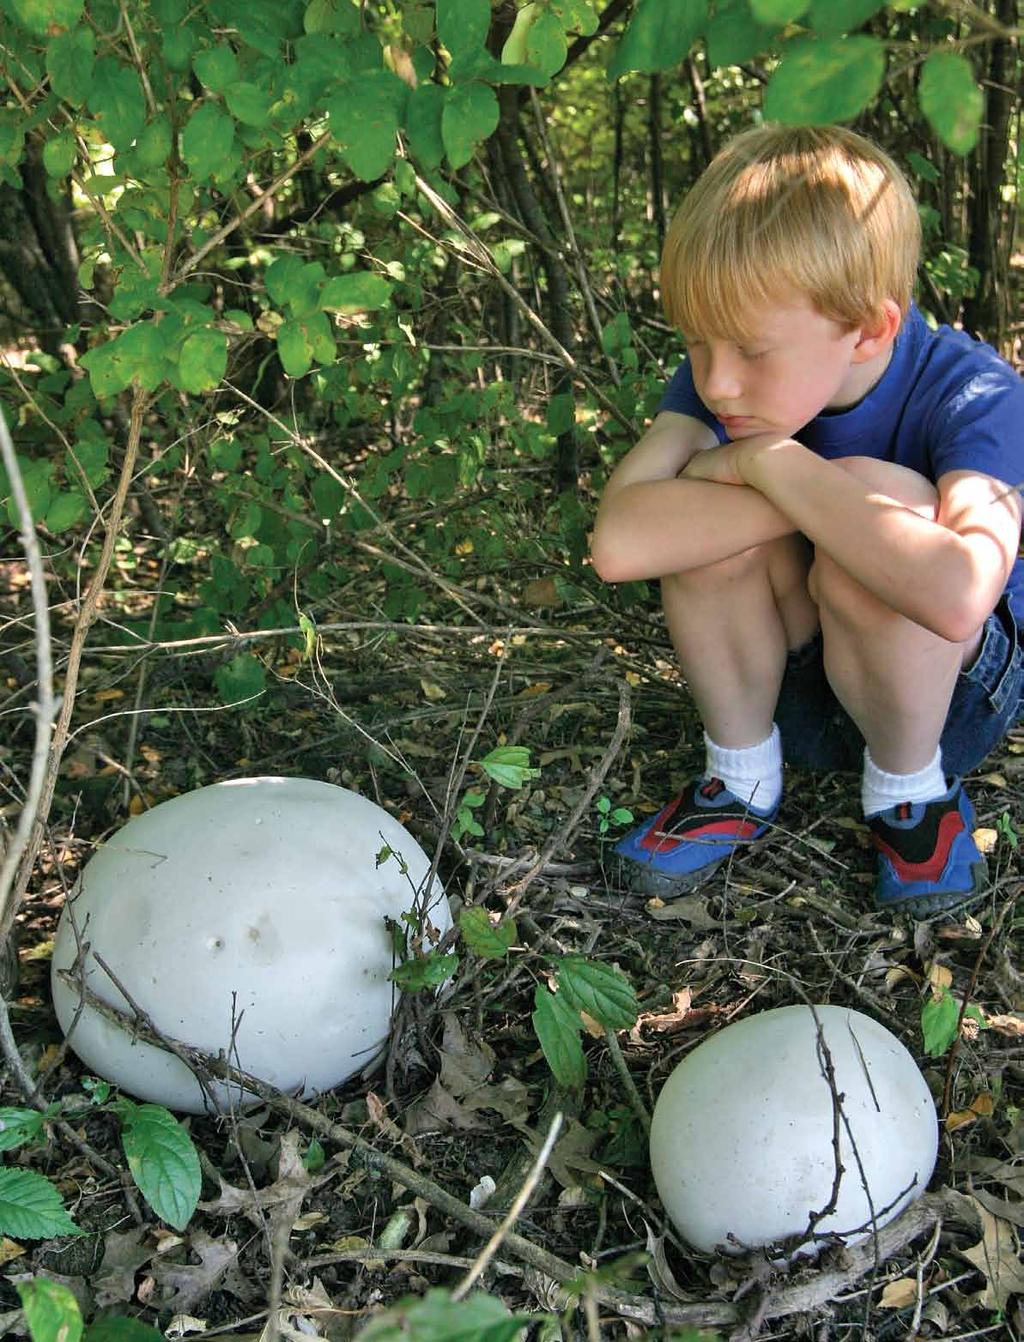 Not your average puffball While most puffballs are only a few inches across, the boy in